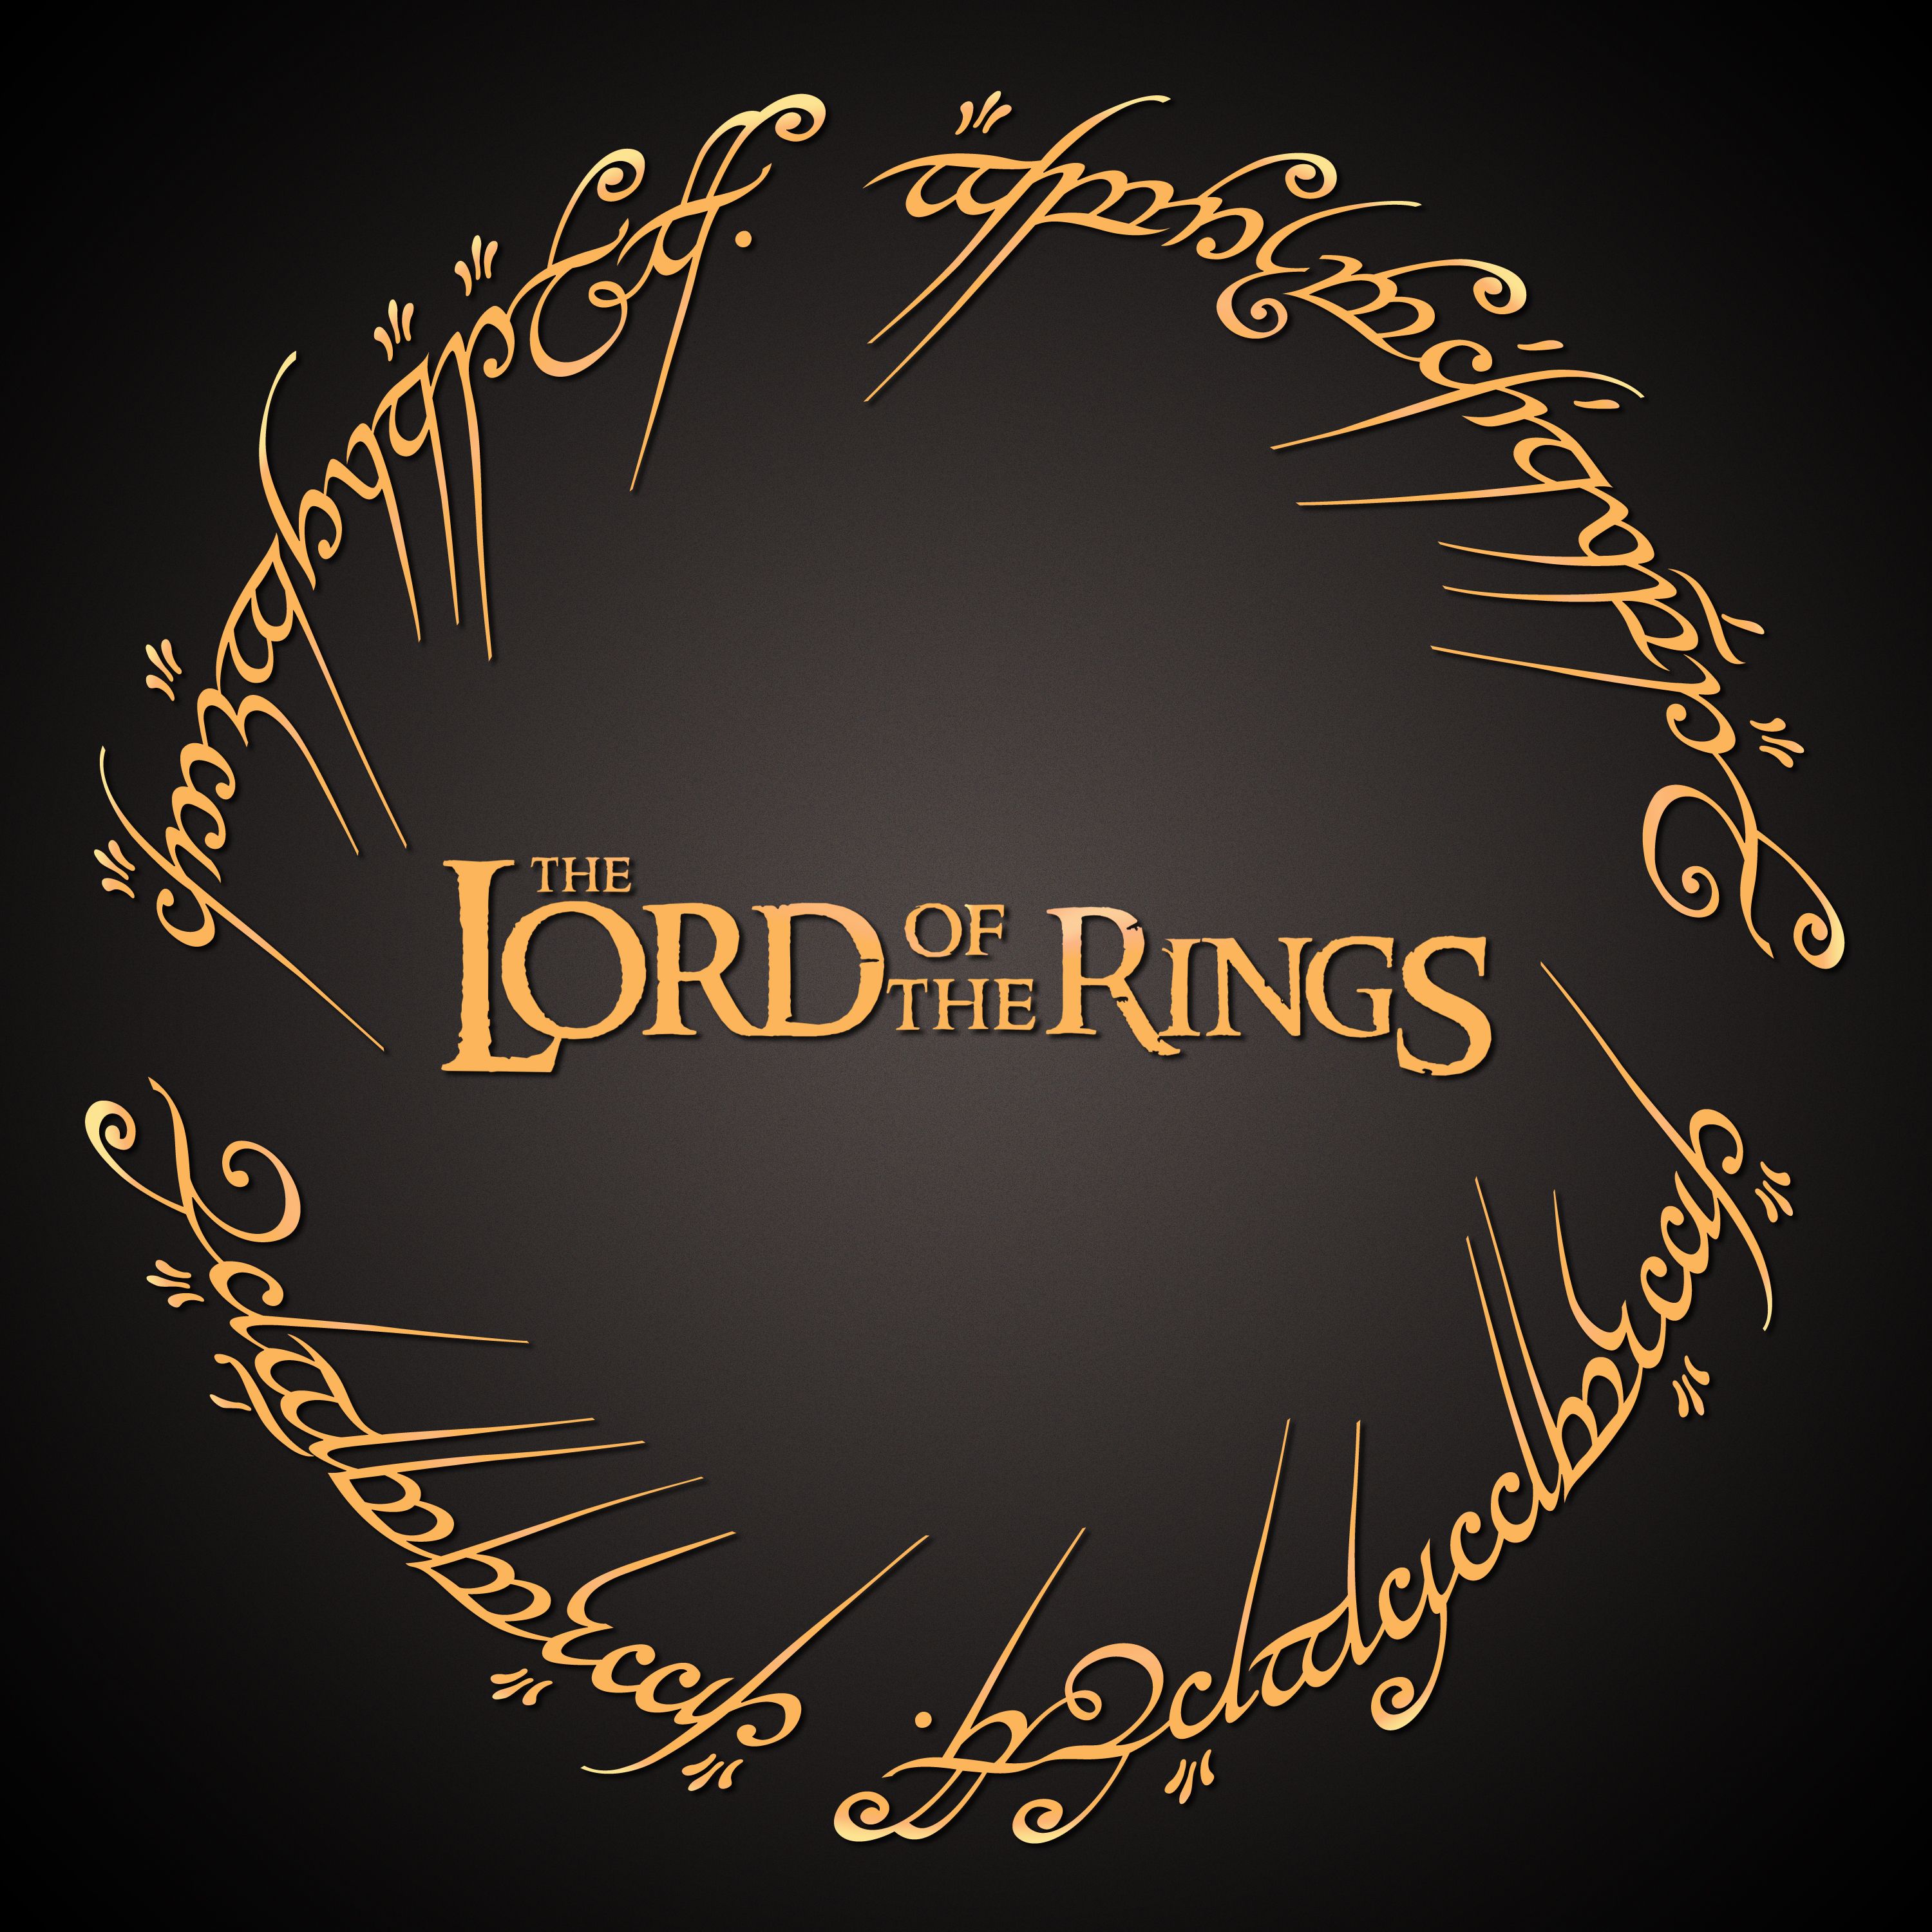 Minecraft - LORD OF THE RINGS! (Middle-Earth Server) 